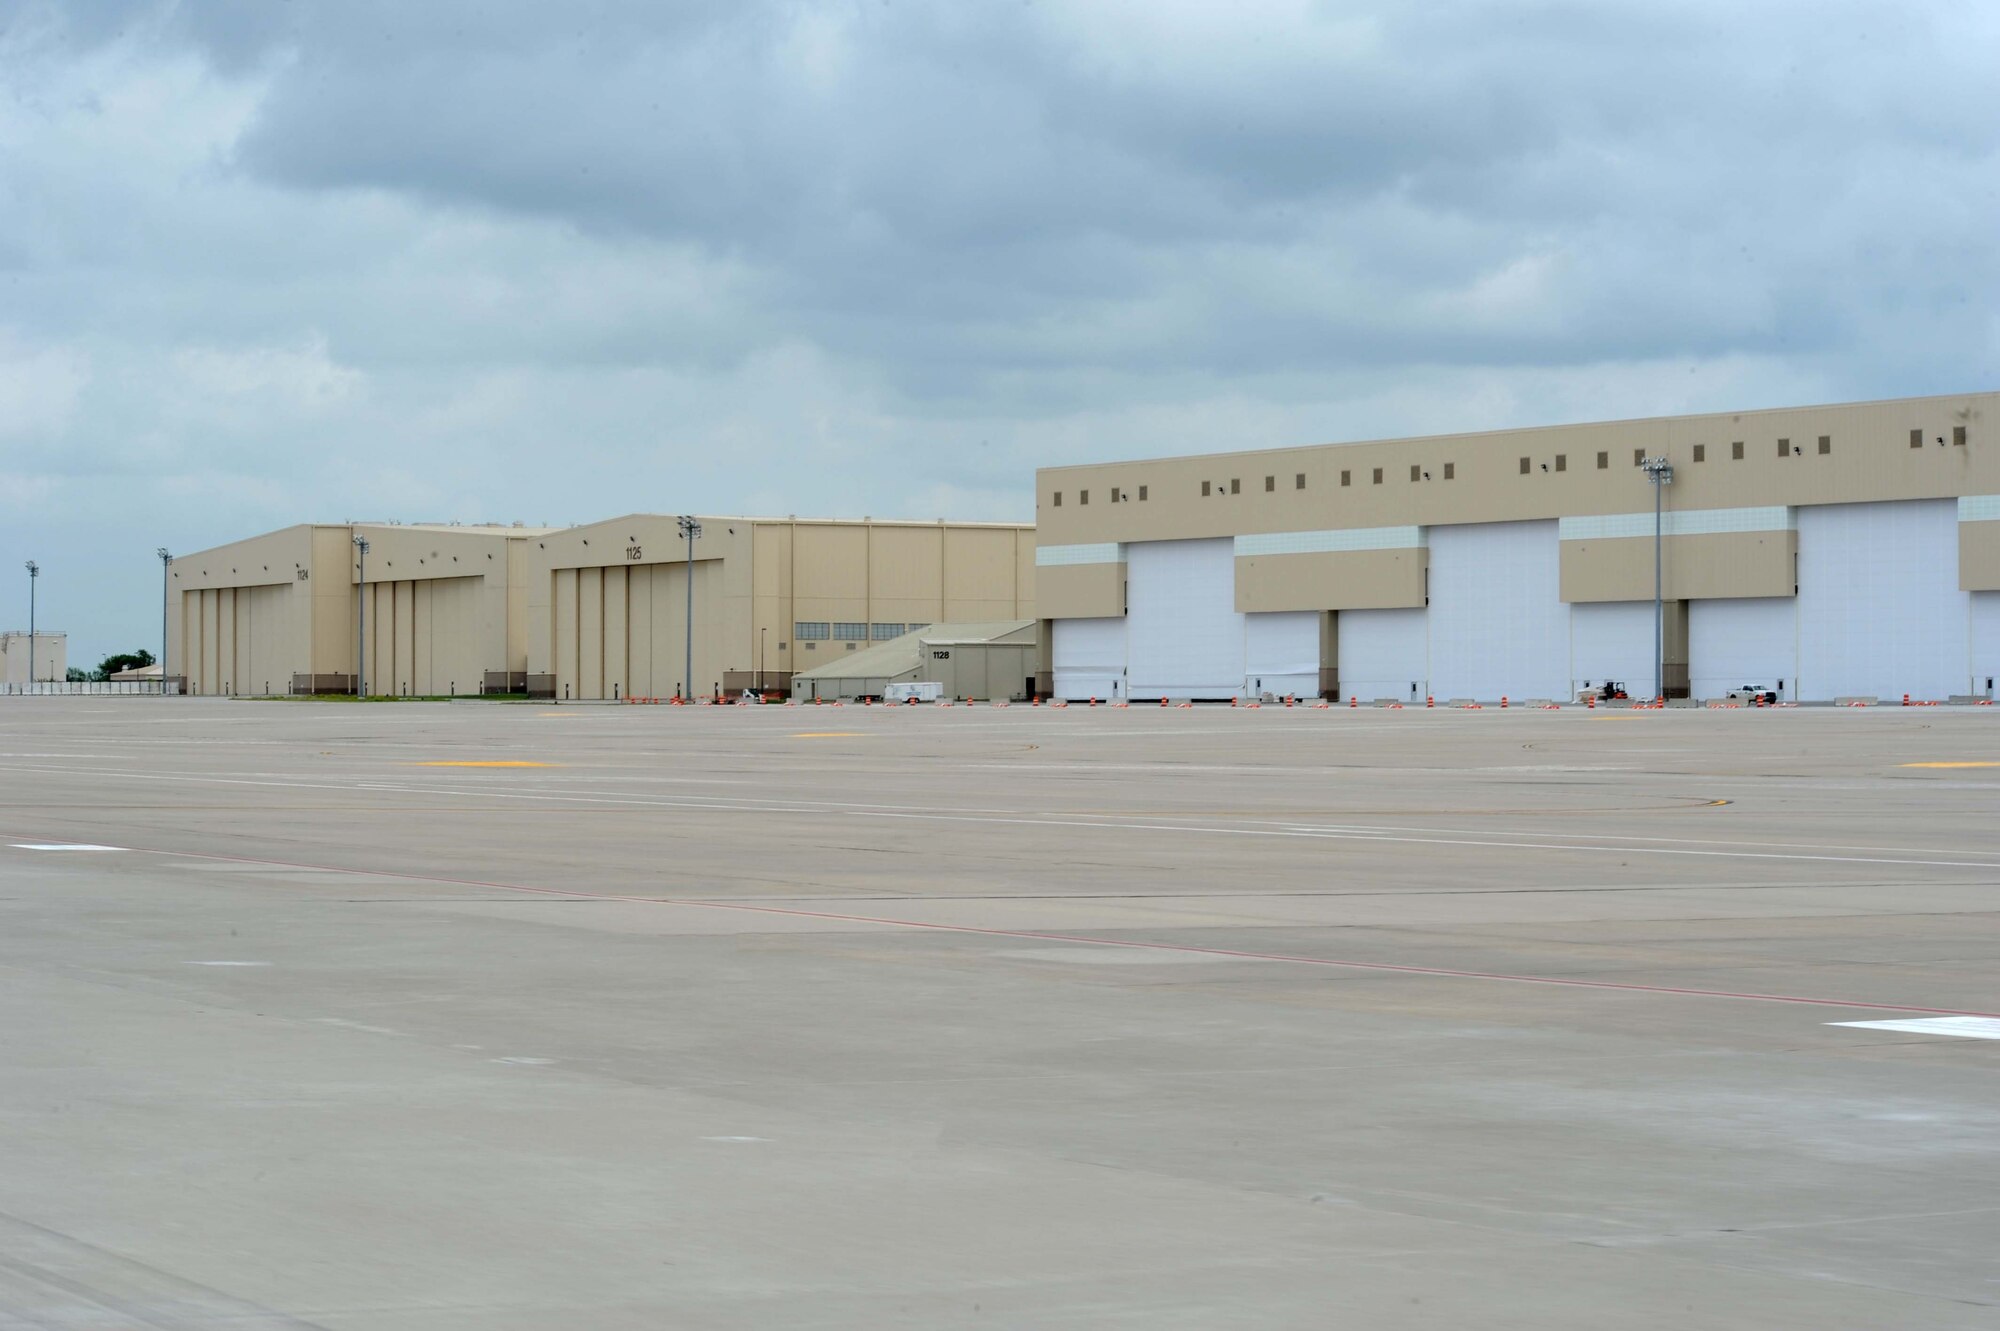 Storm clouds roll in over an empty flightline at McConnell Air Force Base, Kan., May 18, 2017. Base leadership made the decision to evacuate aircraft to keep the assets out of the way of potential severe weather. (U.S. Air Force photo/Senior Airman Tara Fadenrecht)